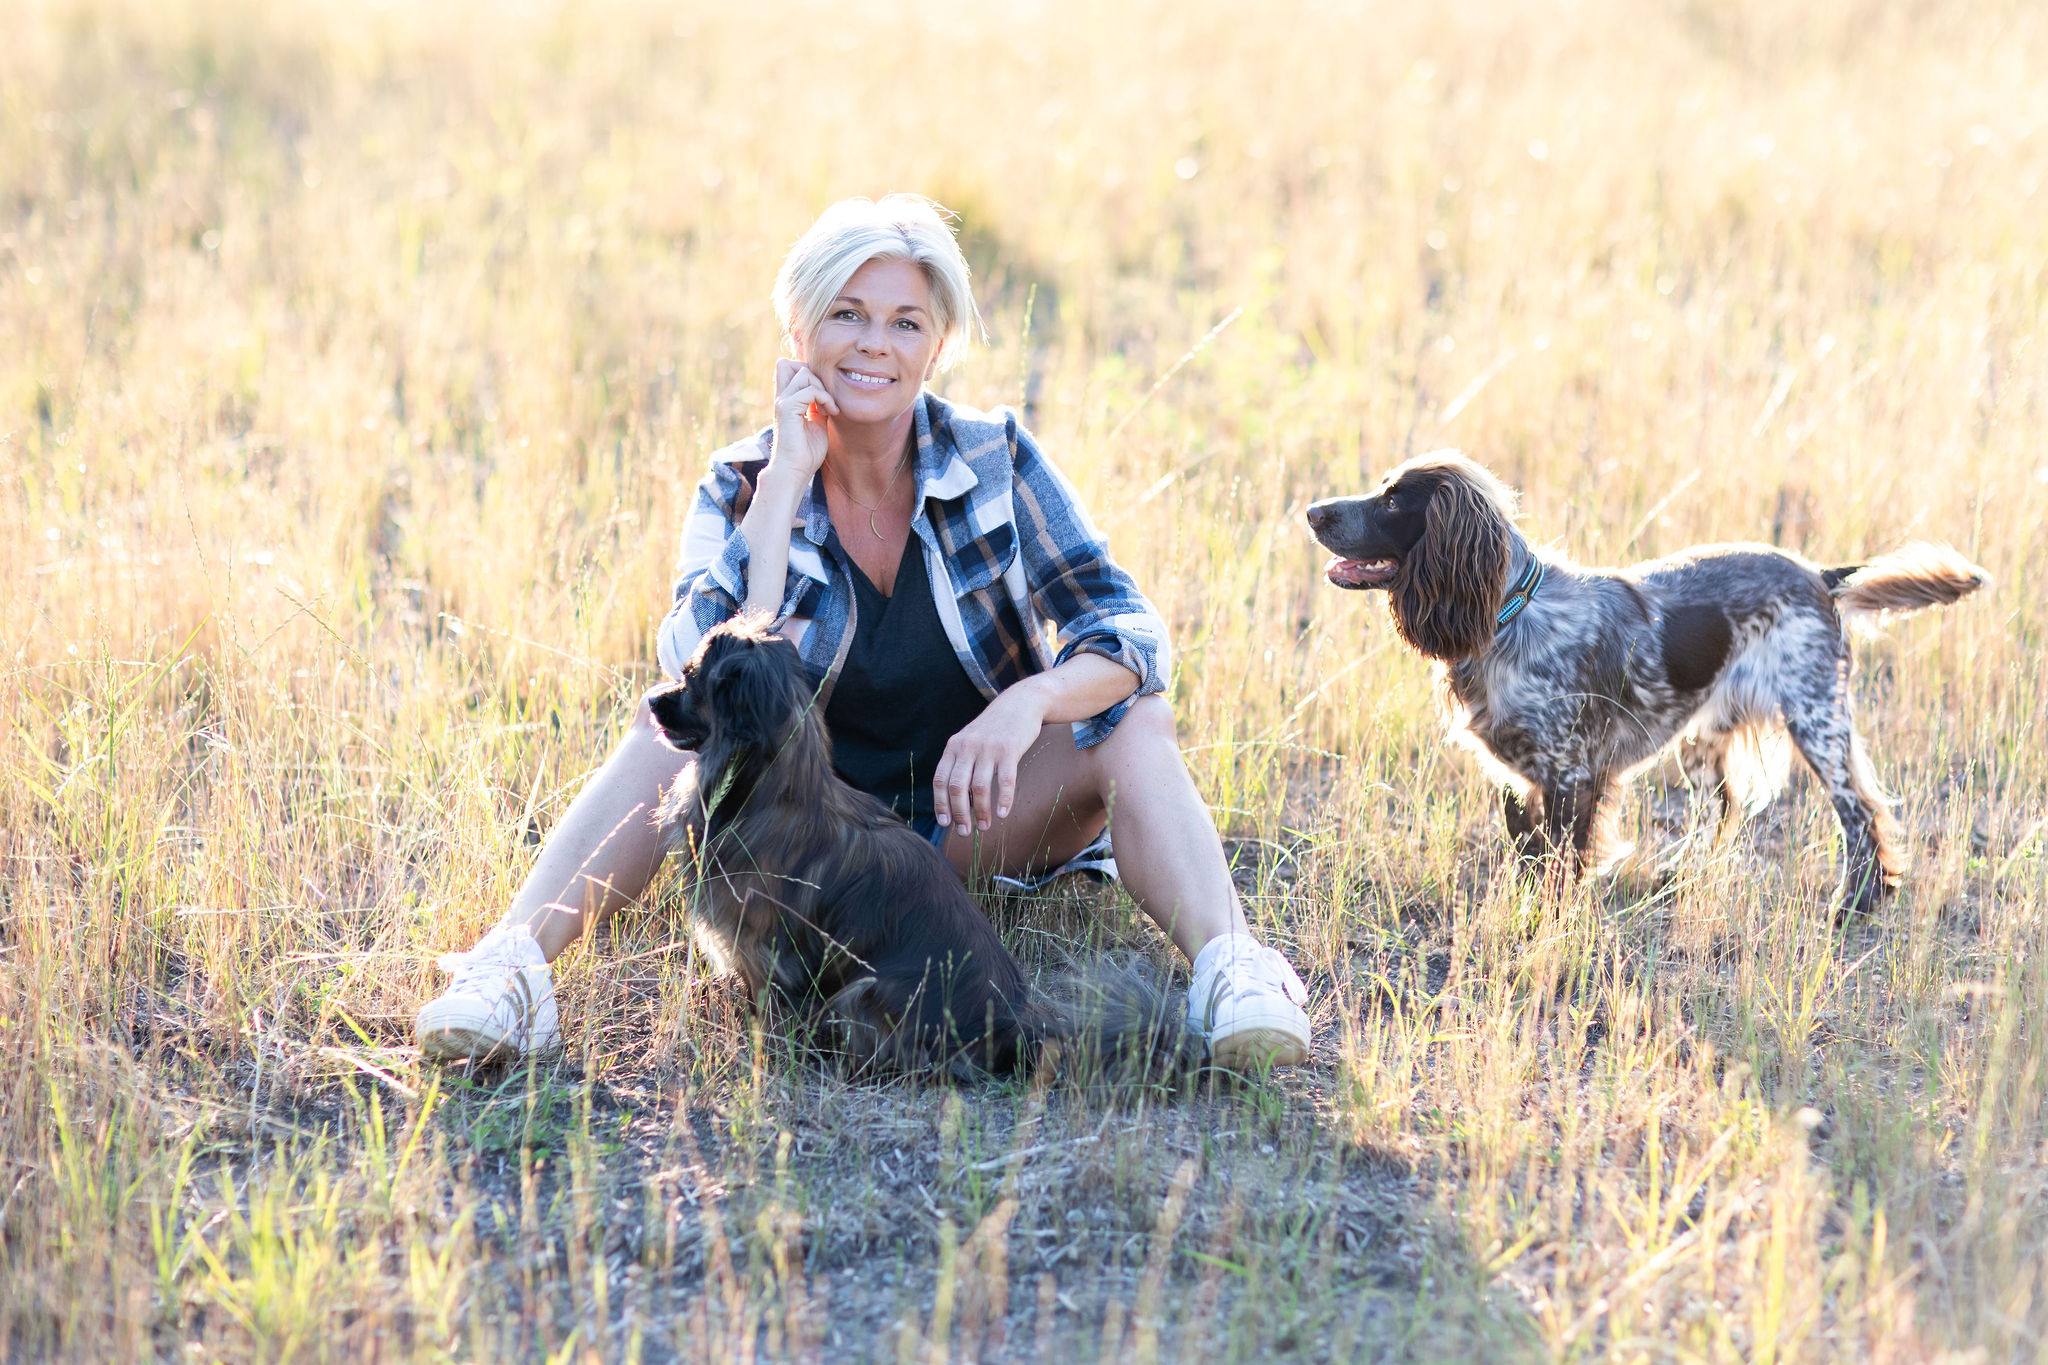 Justine Schuurmans sitting in a field with two dogs, one lying beside her and the other standing nearby, in a setting bathed in soft sunlight.